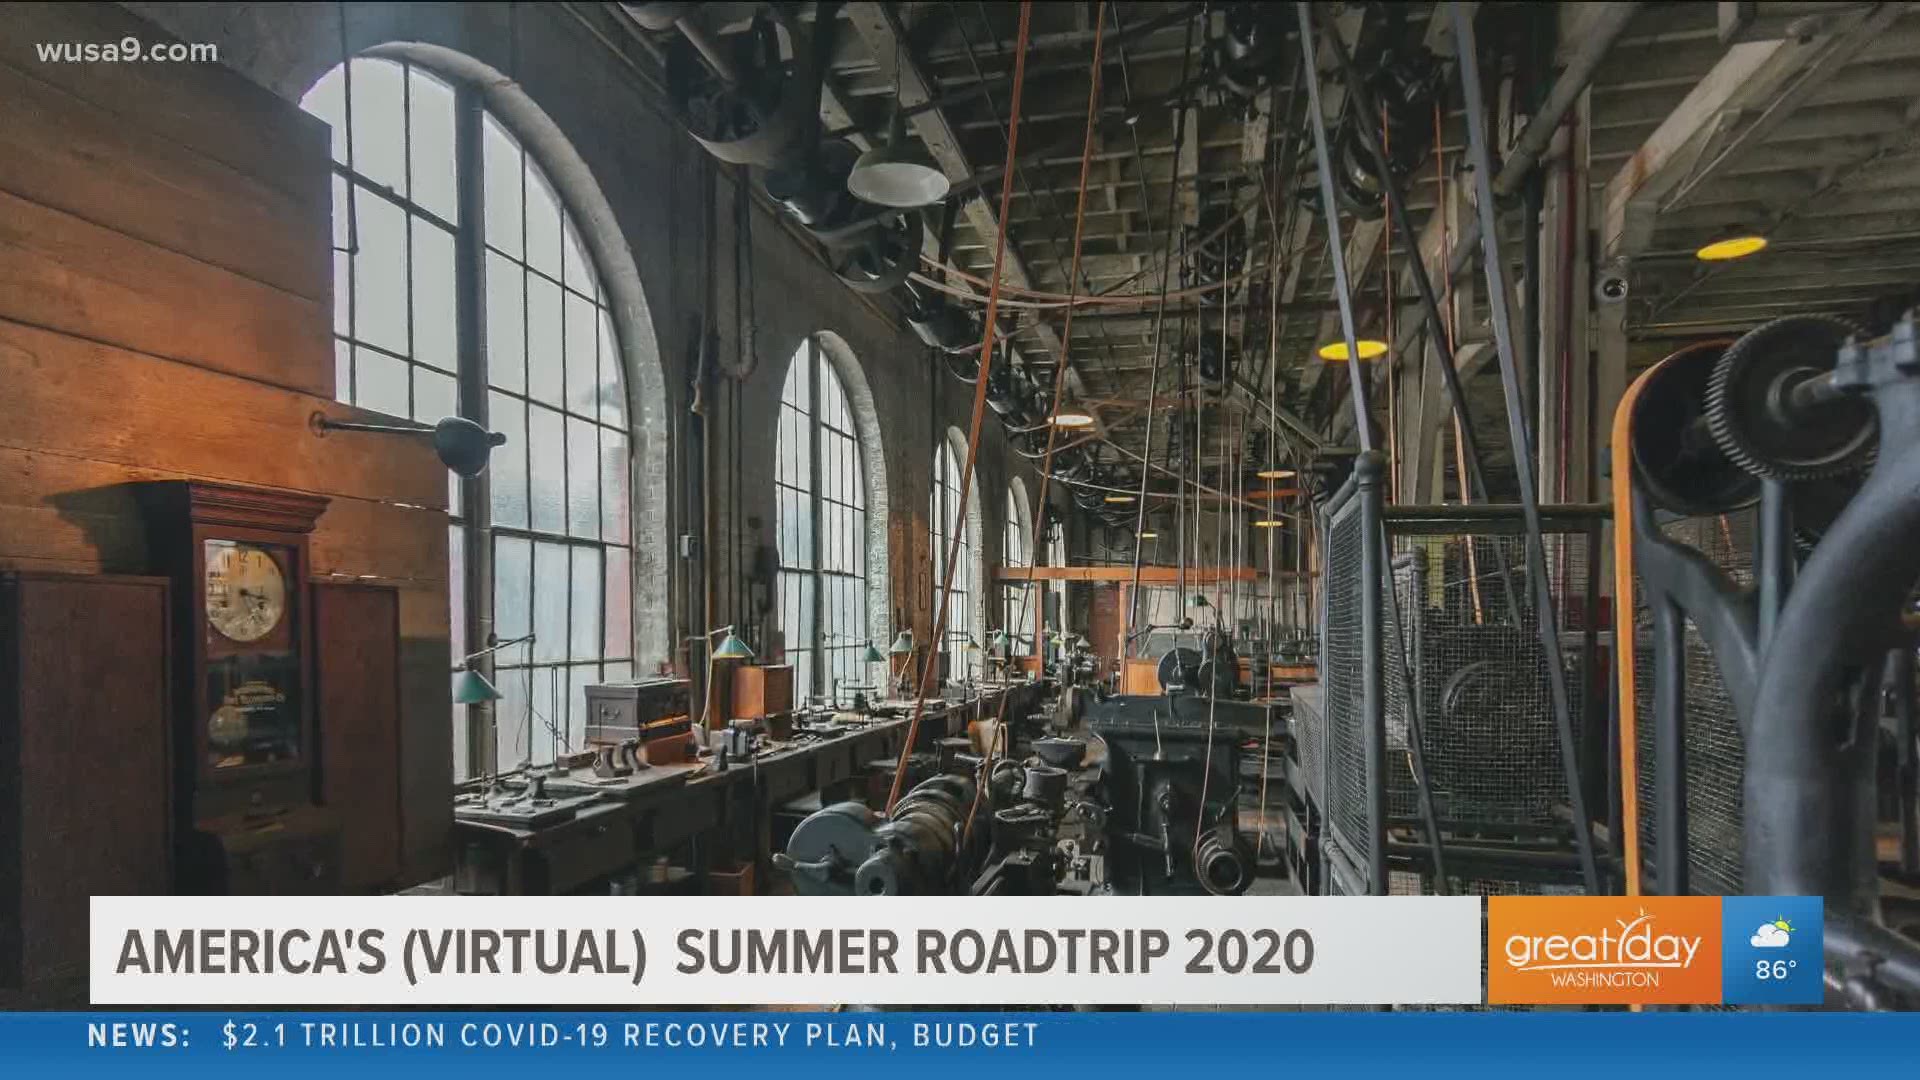 America's Summer Roadtrip 2020 is a free live stream event debuting on 8/1. Lee Wright, Founder and President of The Pursuit of History explains the project.